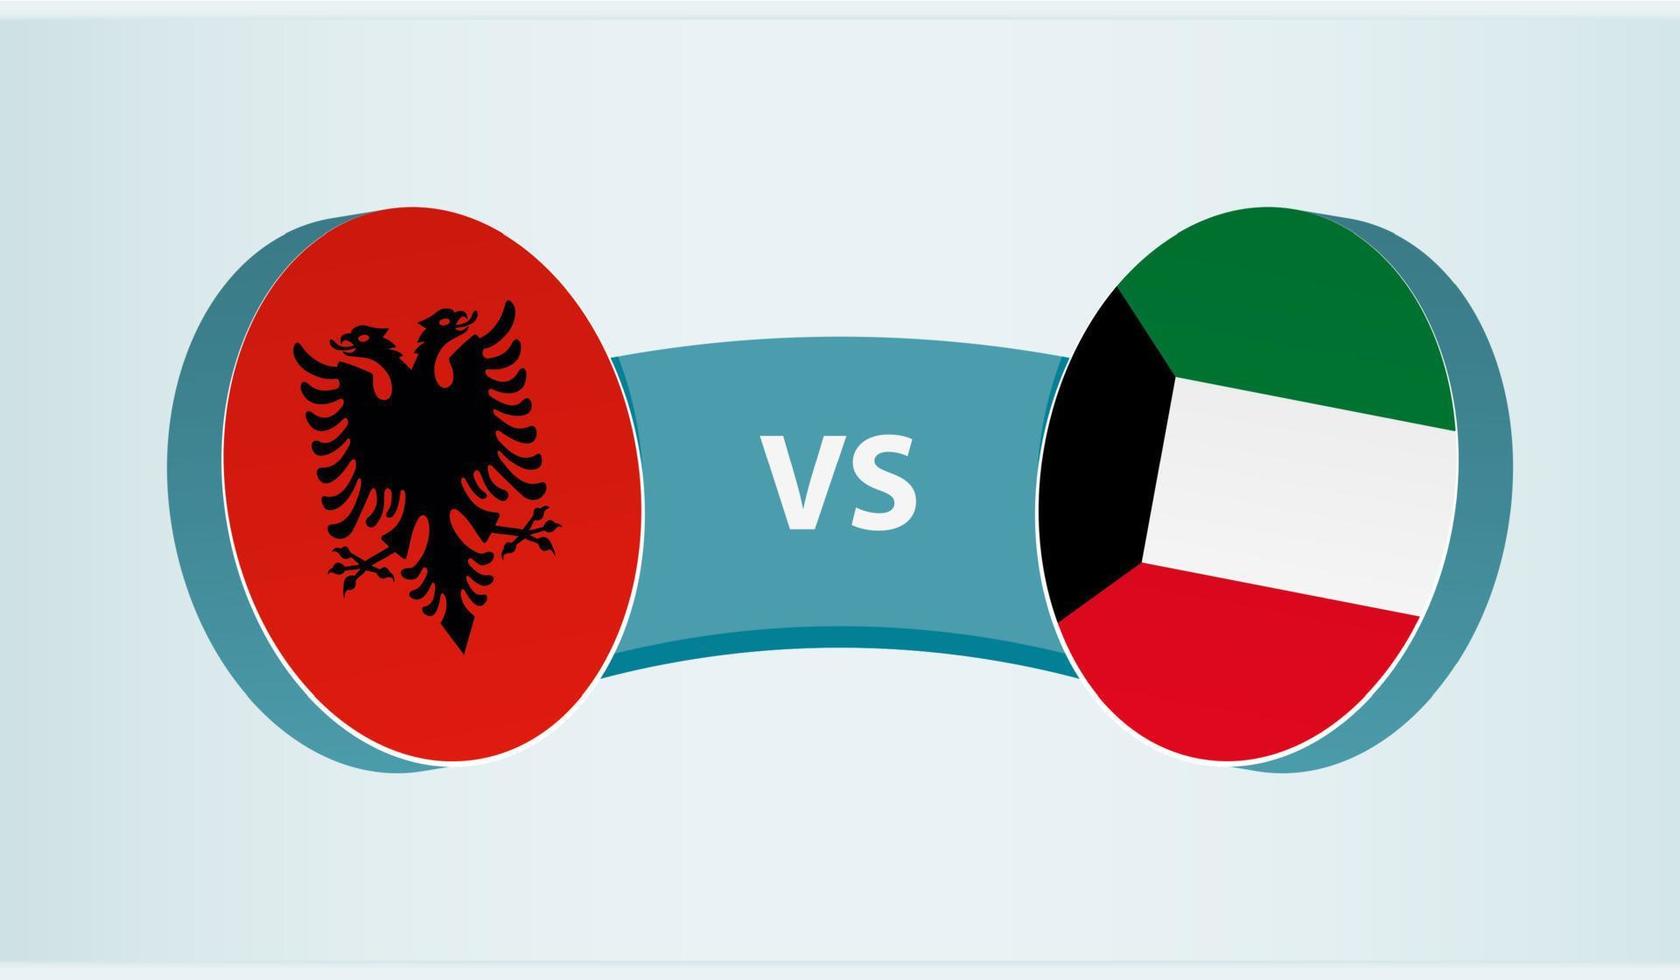 Albania versus Kuwait, team sports competition concept. vector